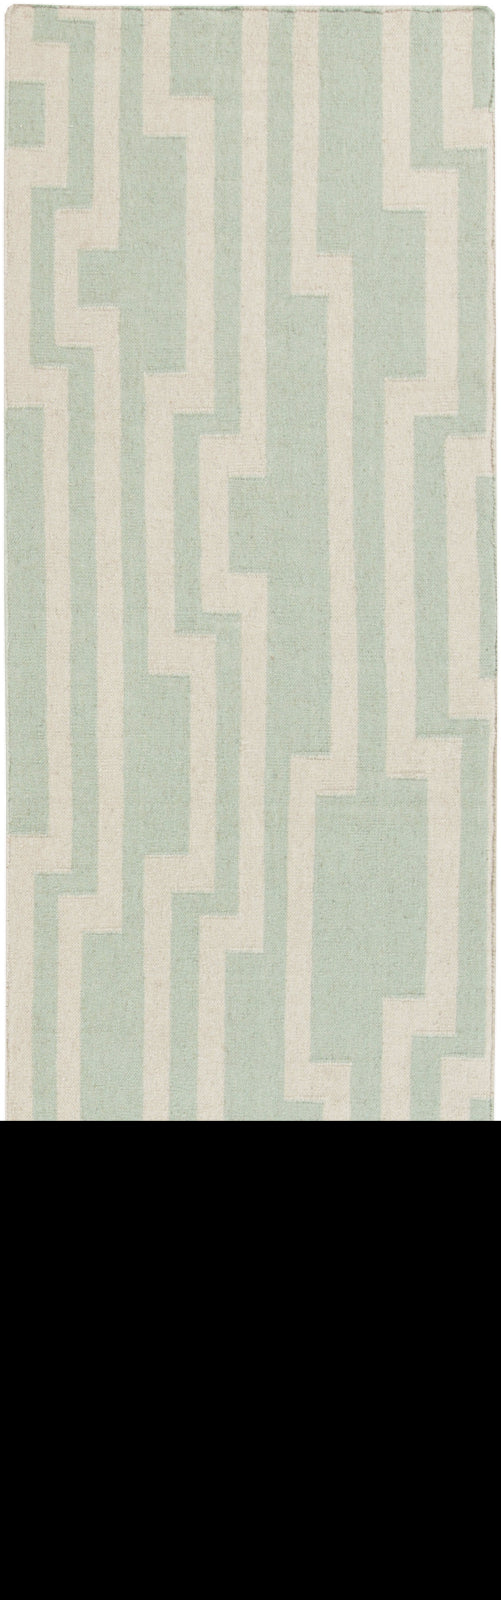 Surya Market Place MKP-1010 Area Rug by Candice Olson